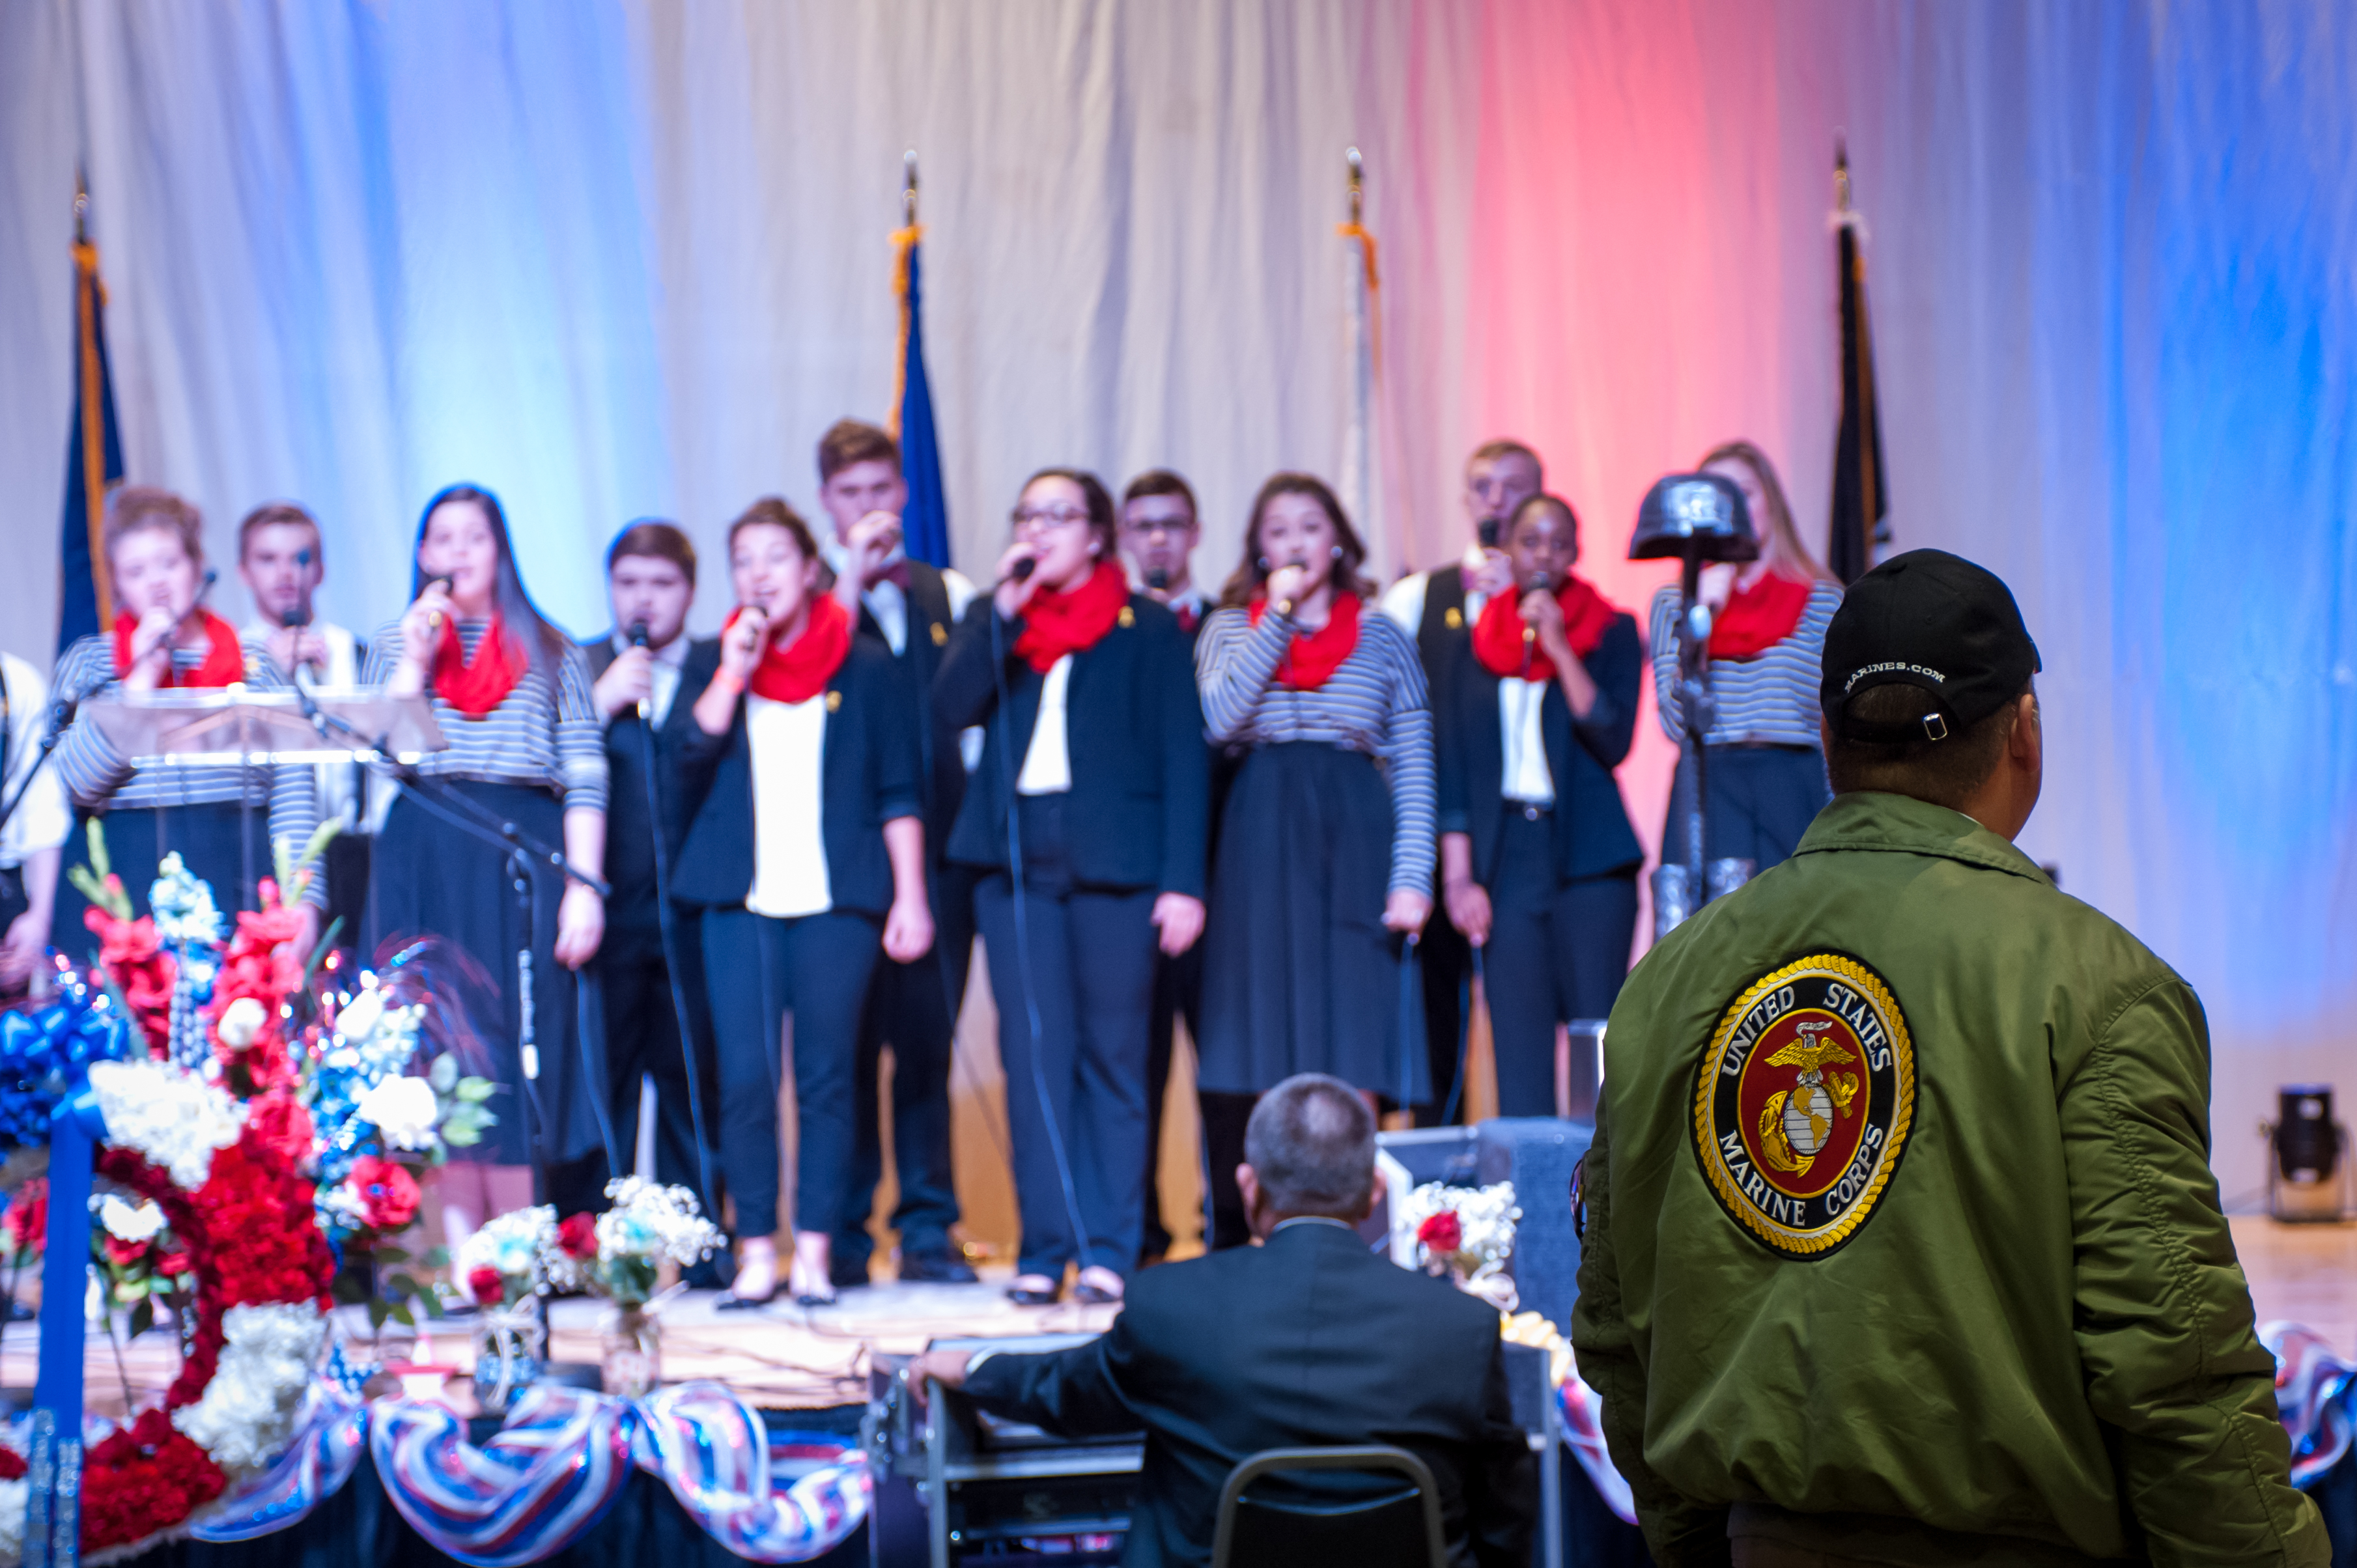 Shaie Williams for AGN Media. US Marine stands during the Armed Forces medley song. The song was sung by Tascosa Freedom Singers during the Armed Forces Day Banquet  in Amarillo, TX Held at the Amarillo Civic Center on May 21, 2016.